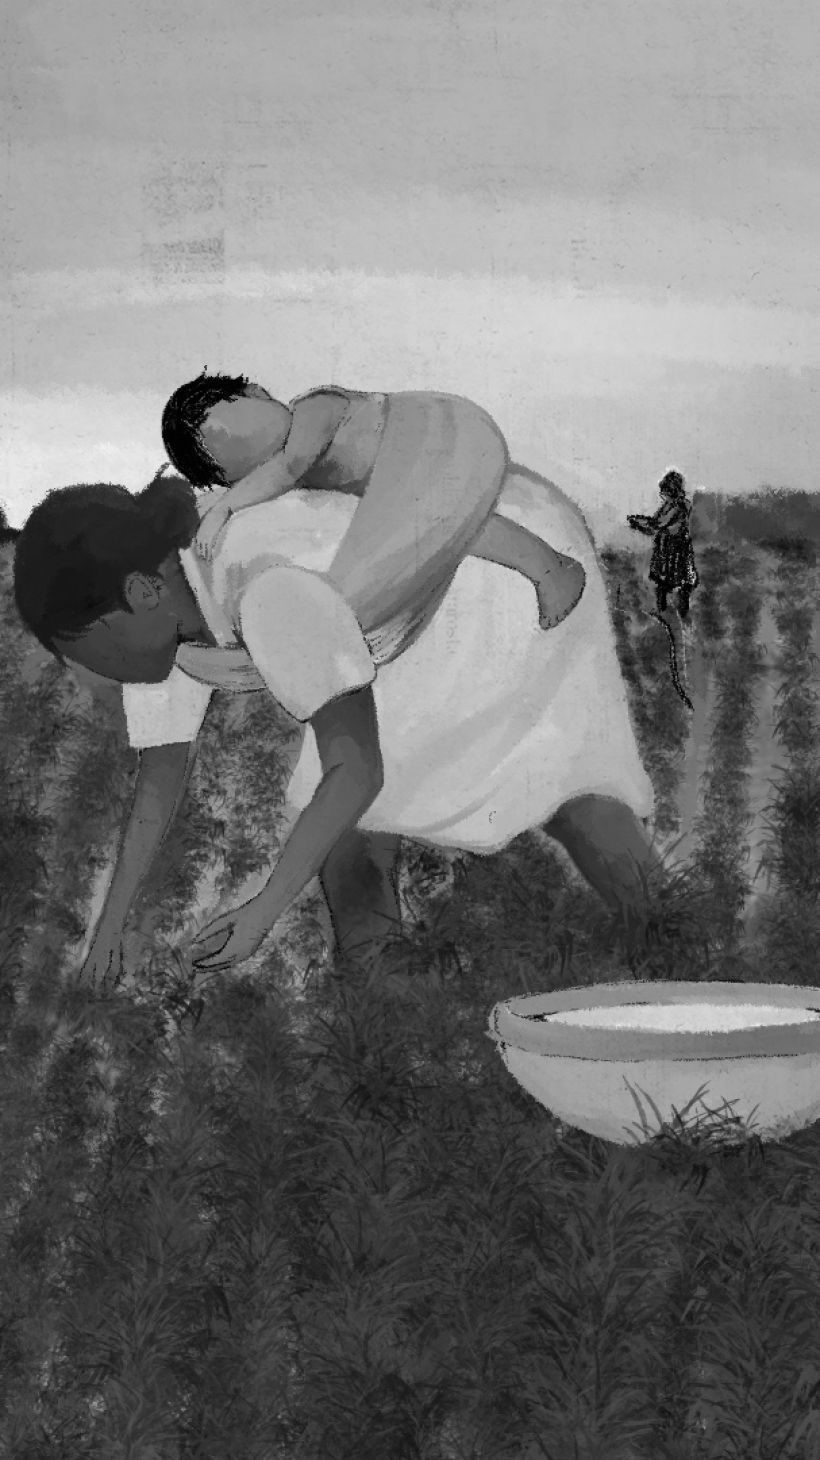 An illustration of a women picking something from the fields with a baby on her back/